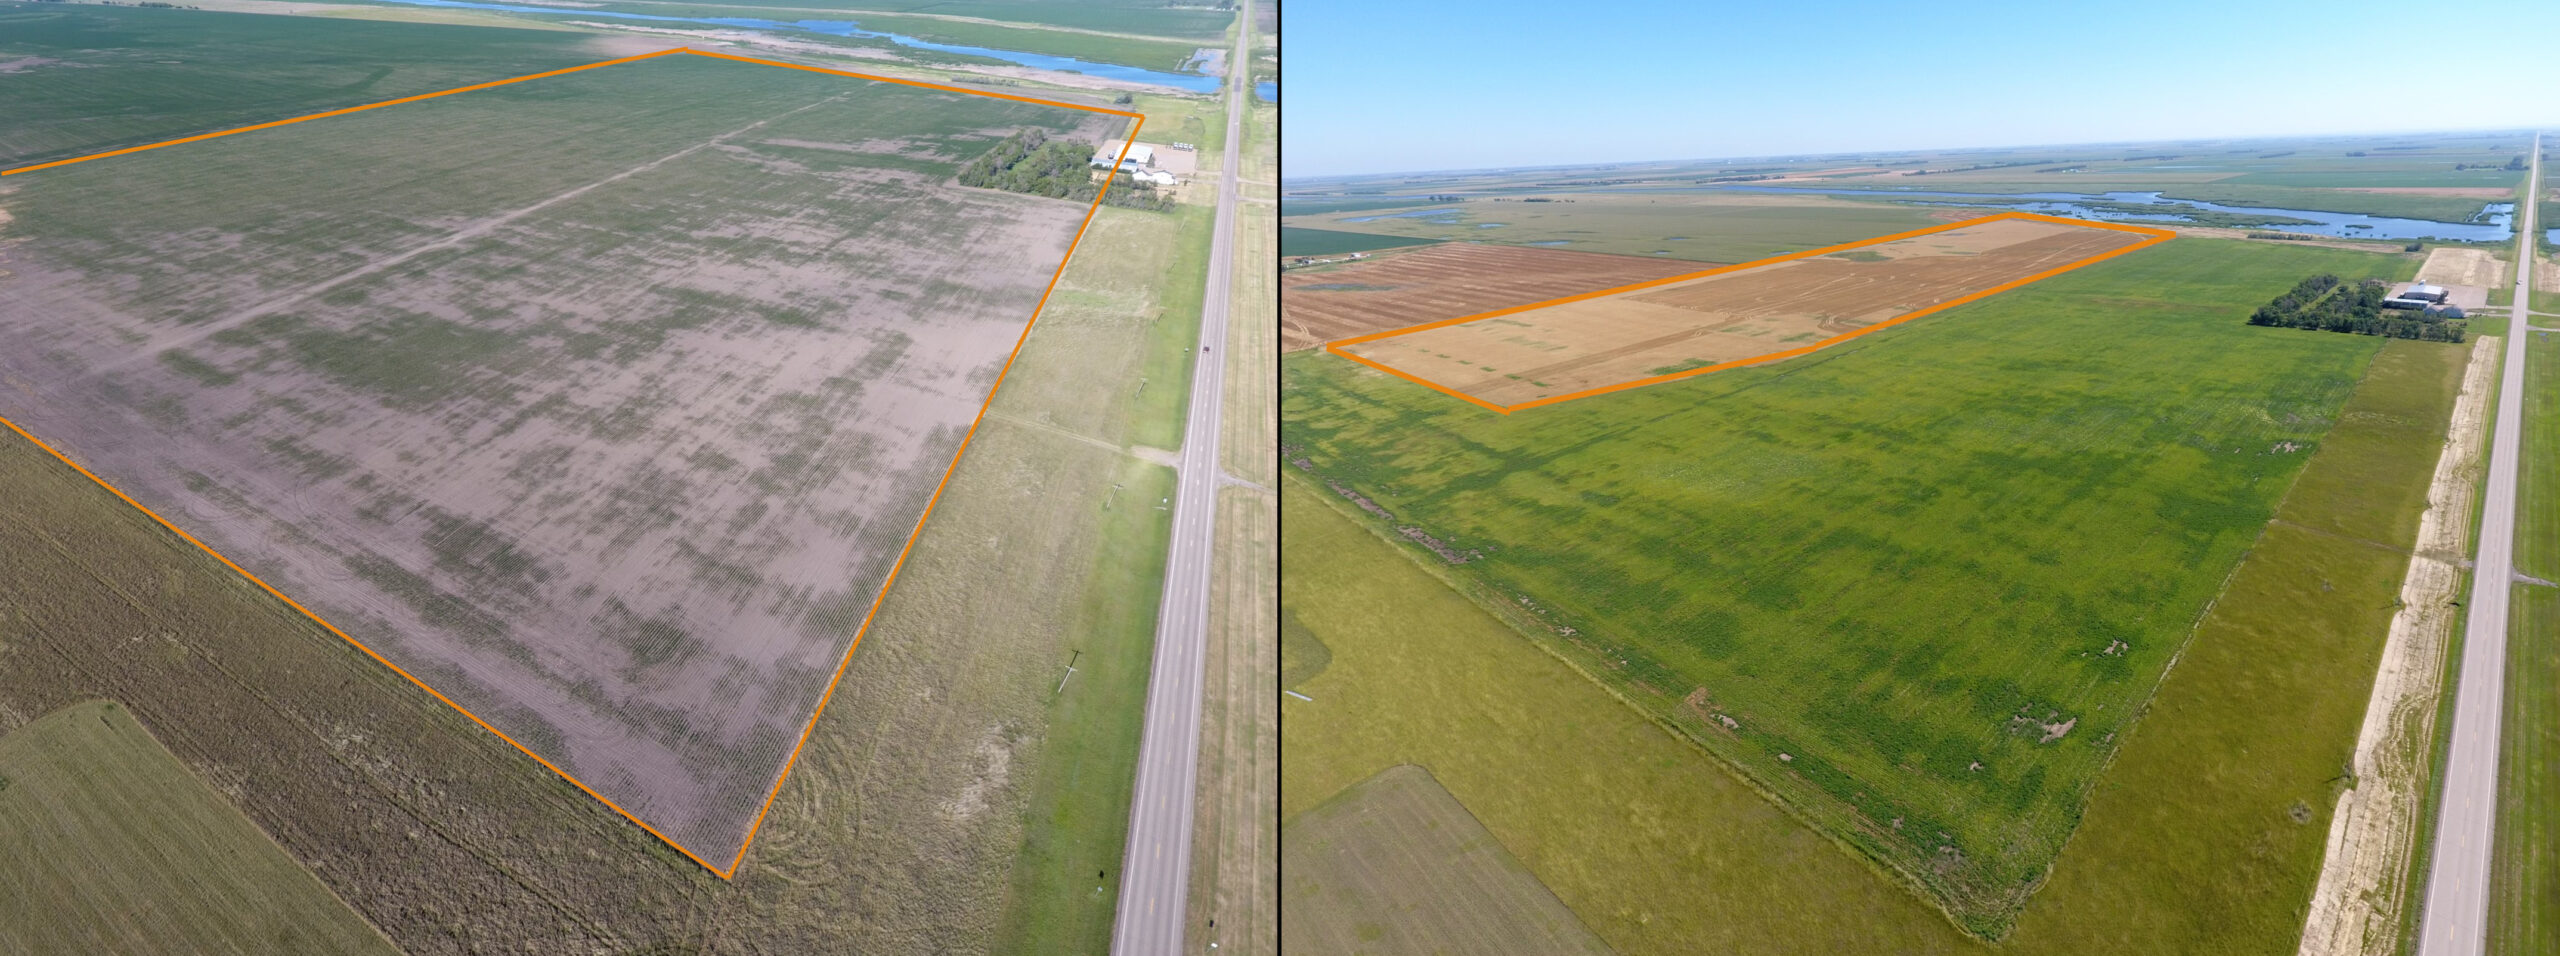 Before and after aerial images of field showing the marginal acres can be managed to be more profitable and improve the soil.